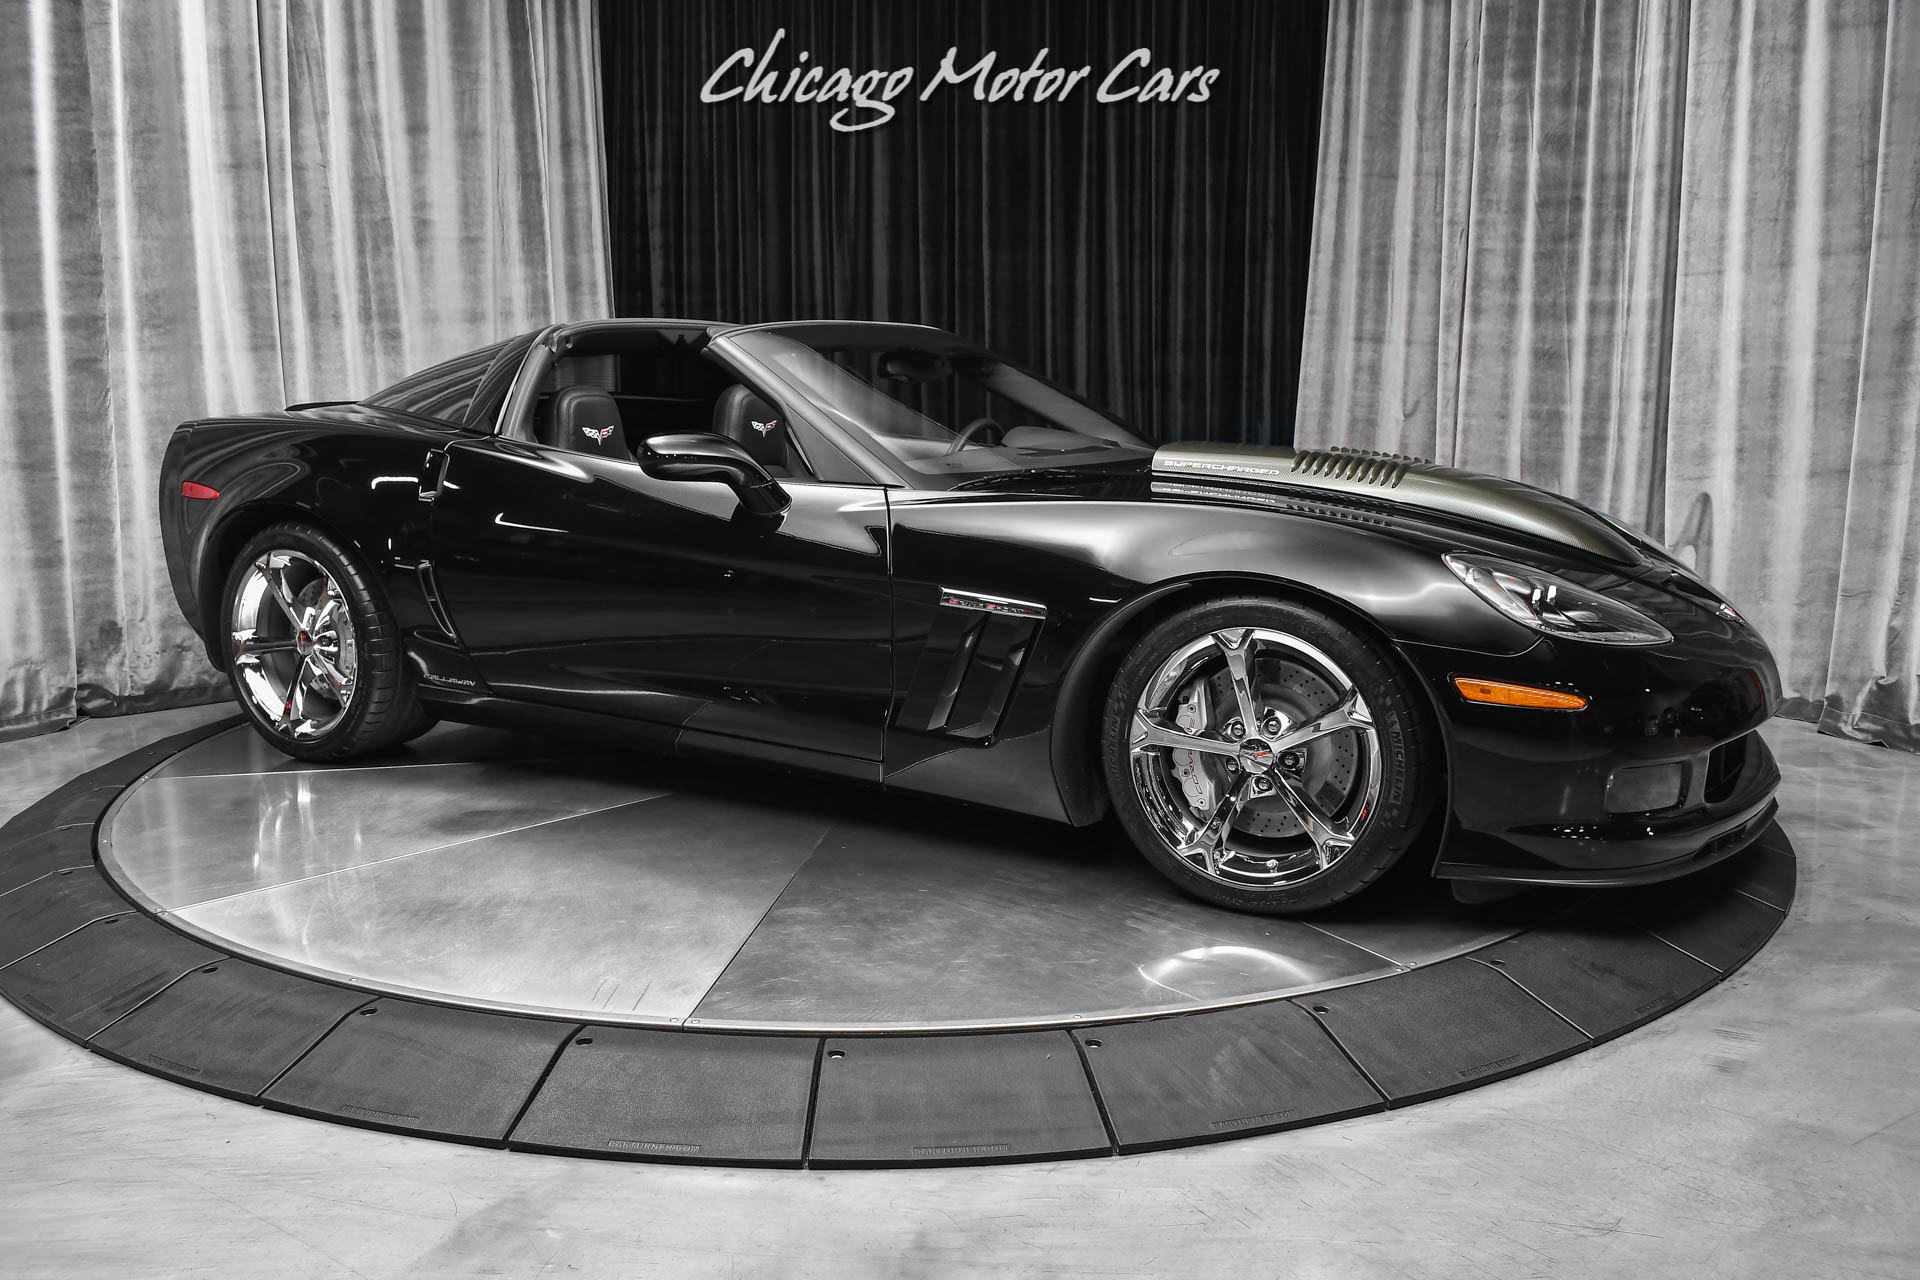 Used-2011-Chevrolet-Corvette-Z16-Grand-Sport-3LT-Coupe-CALLAWAY-SC606-Package-Only-10K-Miles